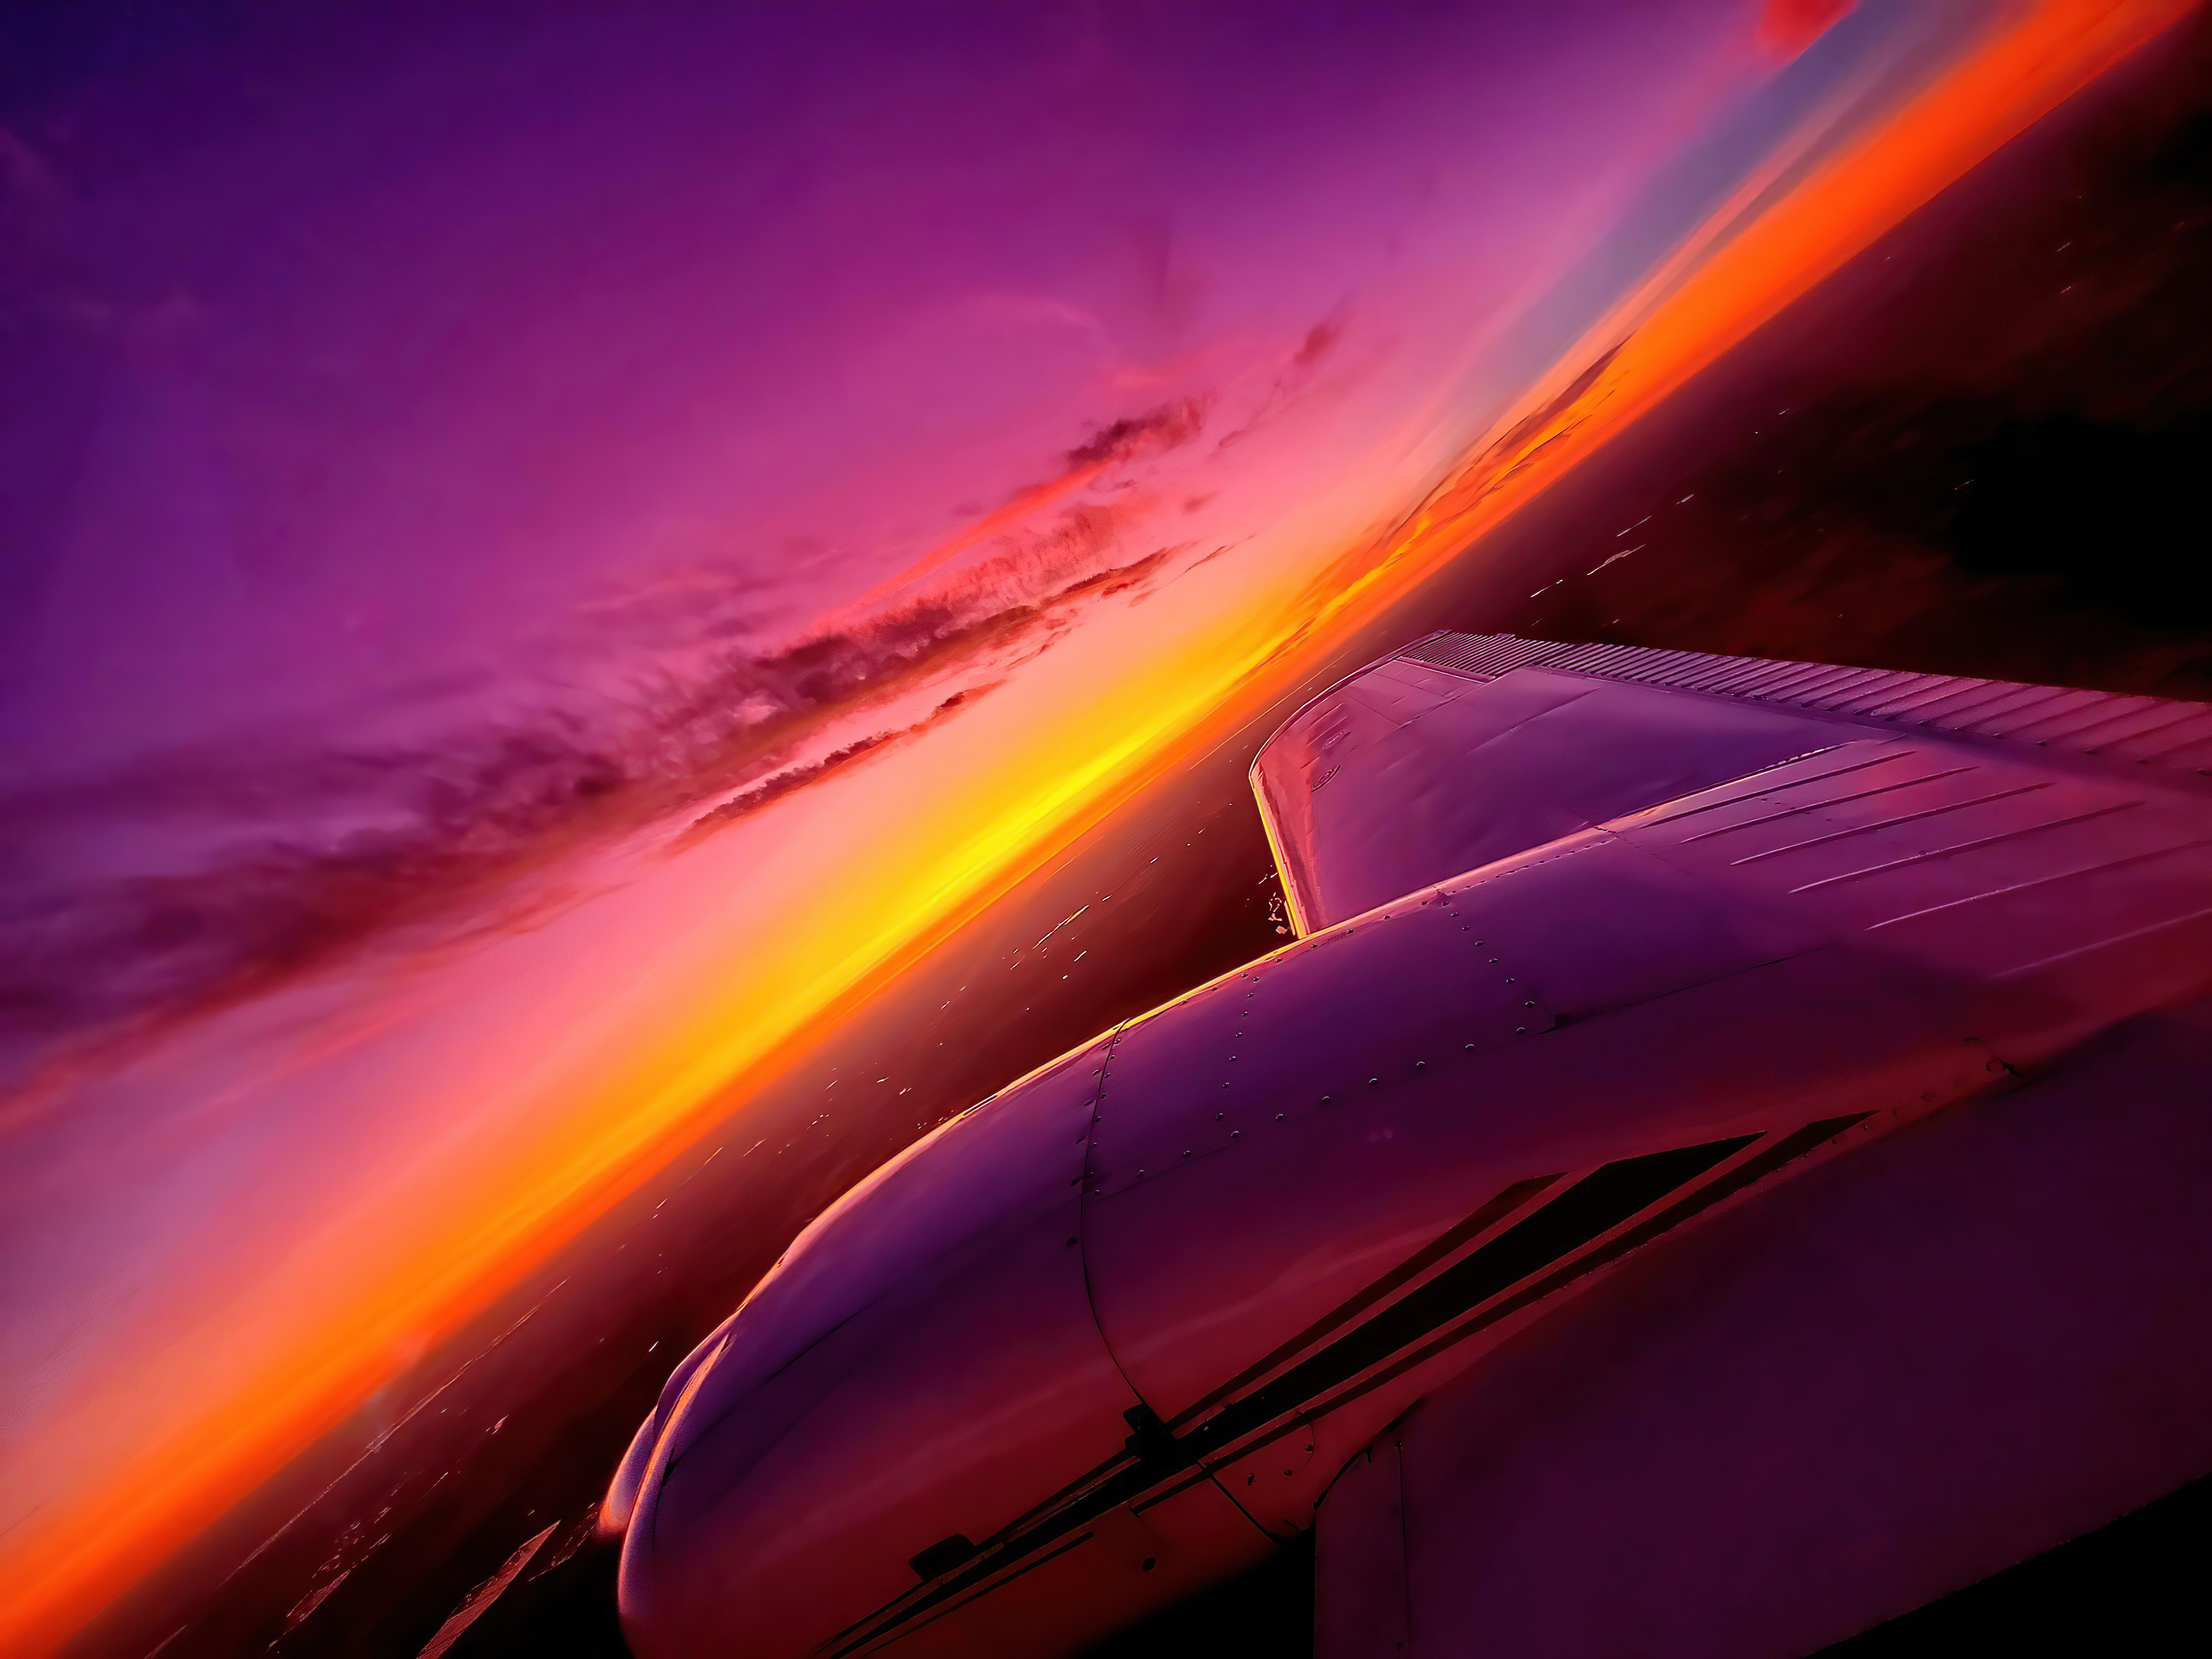 synthwave sunset plane view 4k 1630068596 - Synthwave Sunset Plane View 4k - Synthwave Sunset Plane View wallpapers, Synthwave Sunset Plane View 4k wallpapers